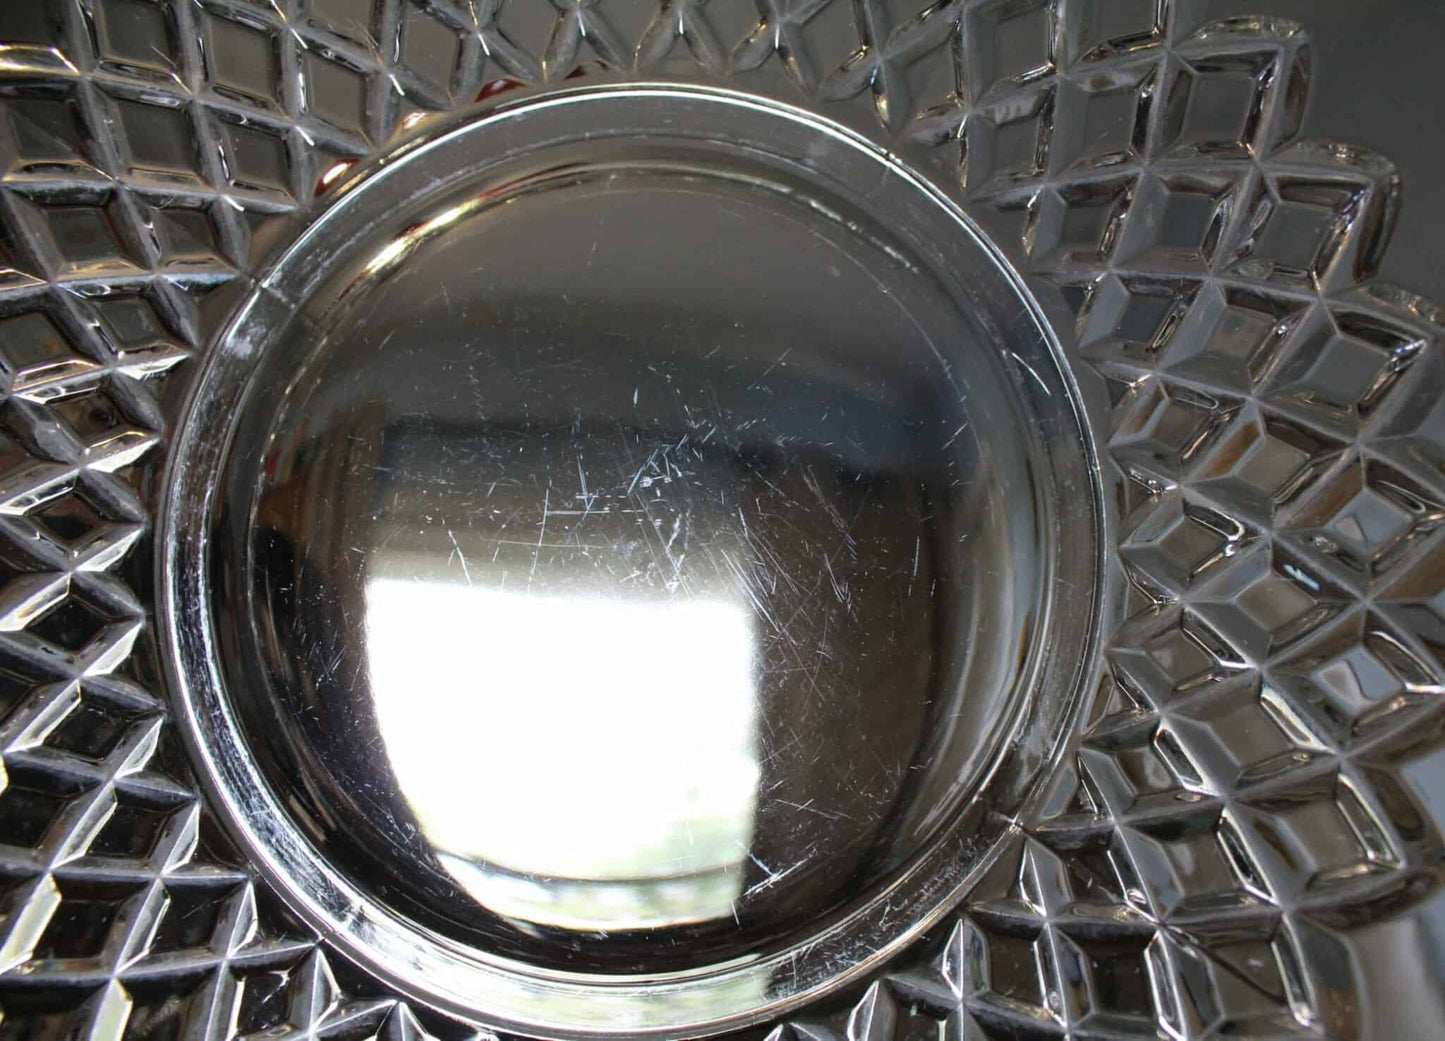 Bowl, McKee Glass, Colonial Band / Plymouth Thumbprint Clear, Vintage